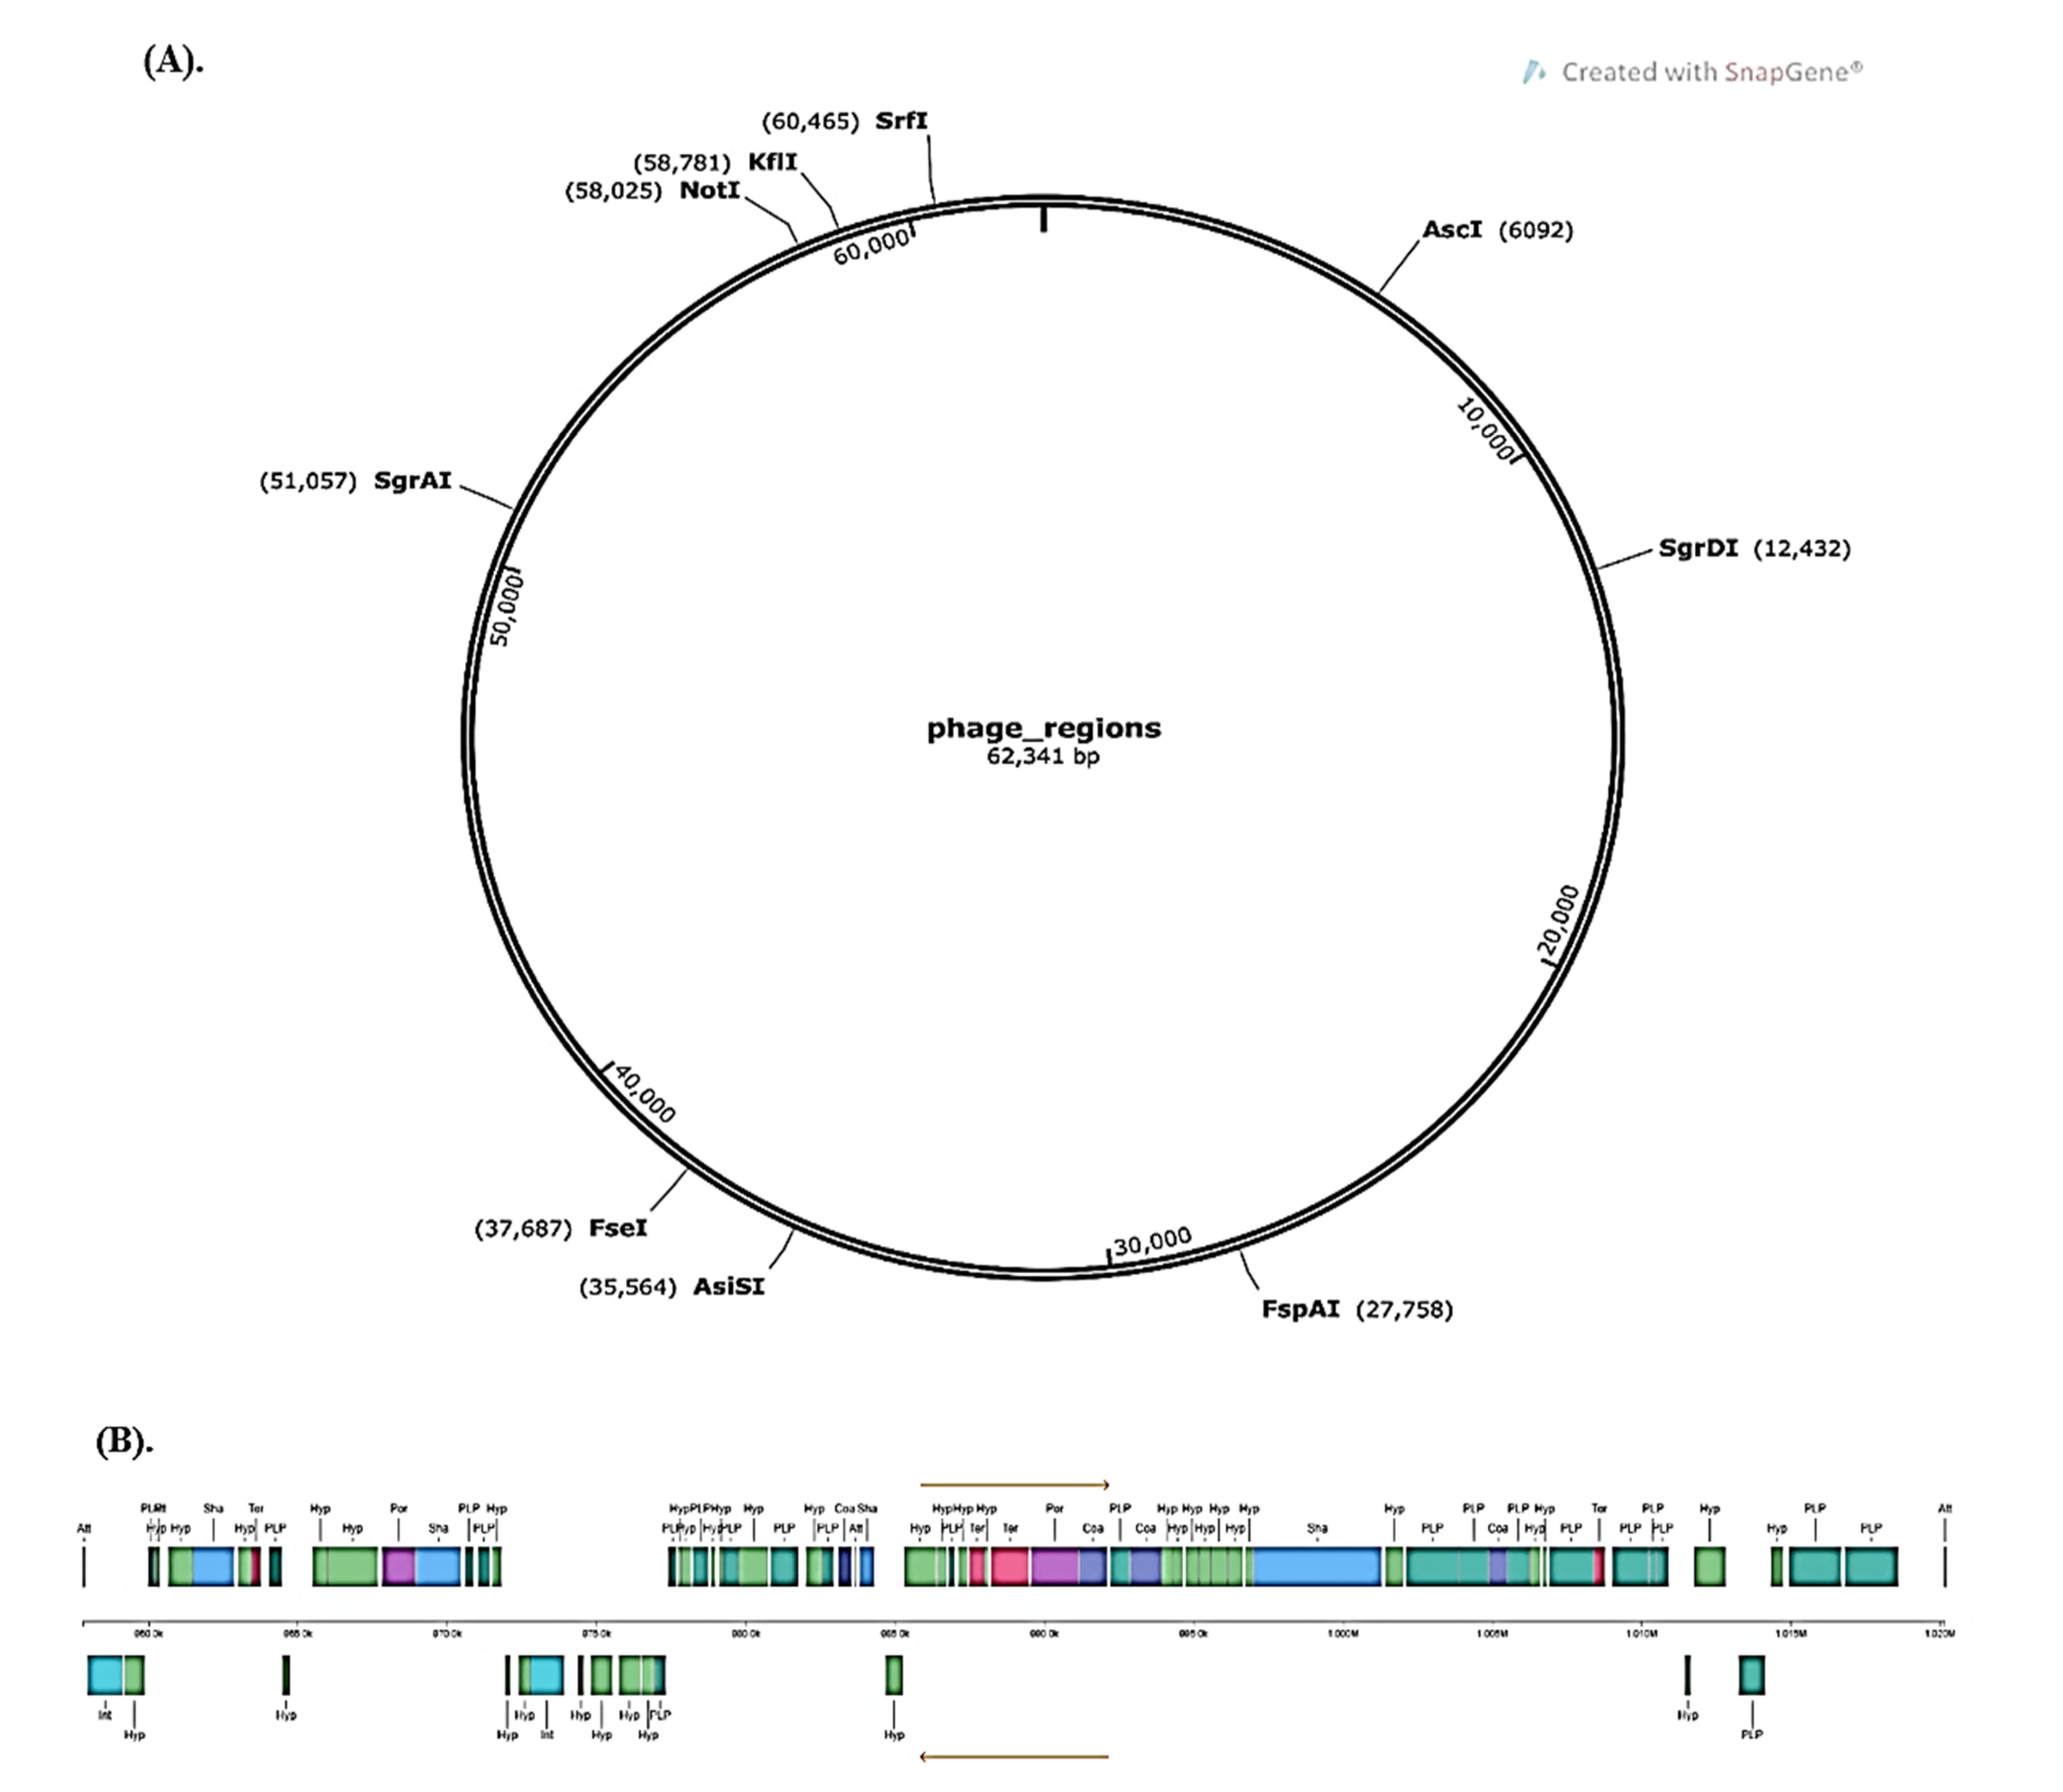 Full article: Complete genome sequencing of exopolysaccharide-producing  Lactobacillus plantarum K25 provides genetic evidence for the probiotic  functionality and cold endurance capacity of the strain